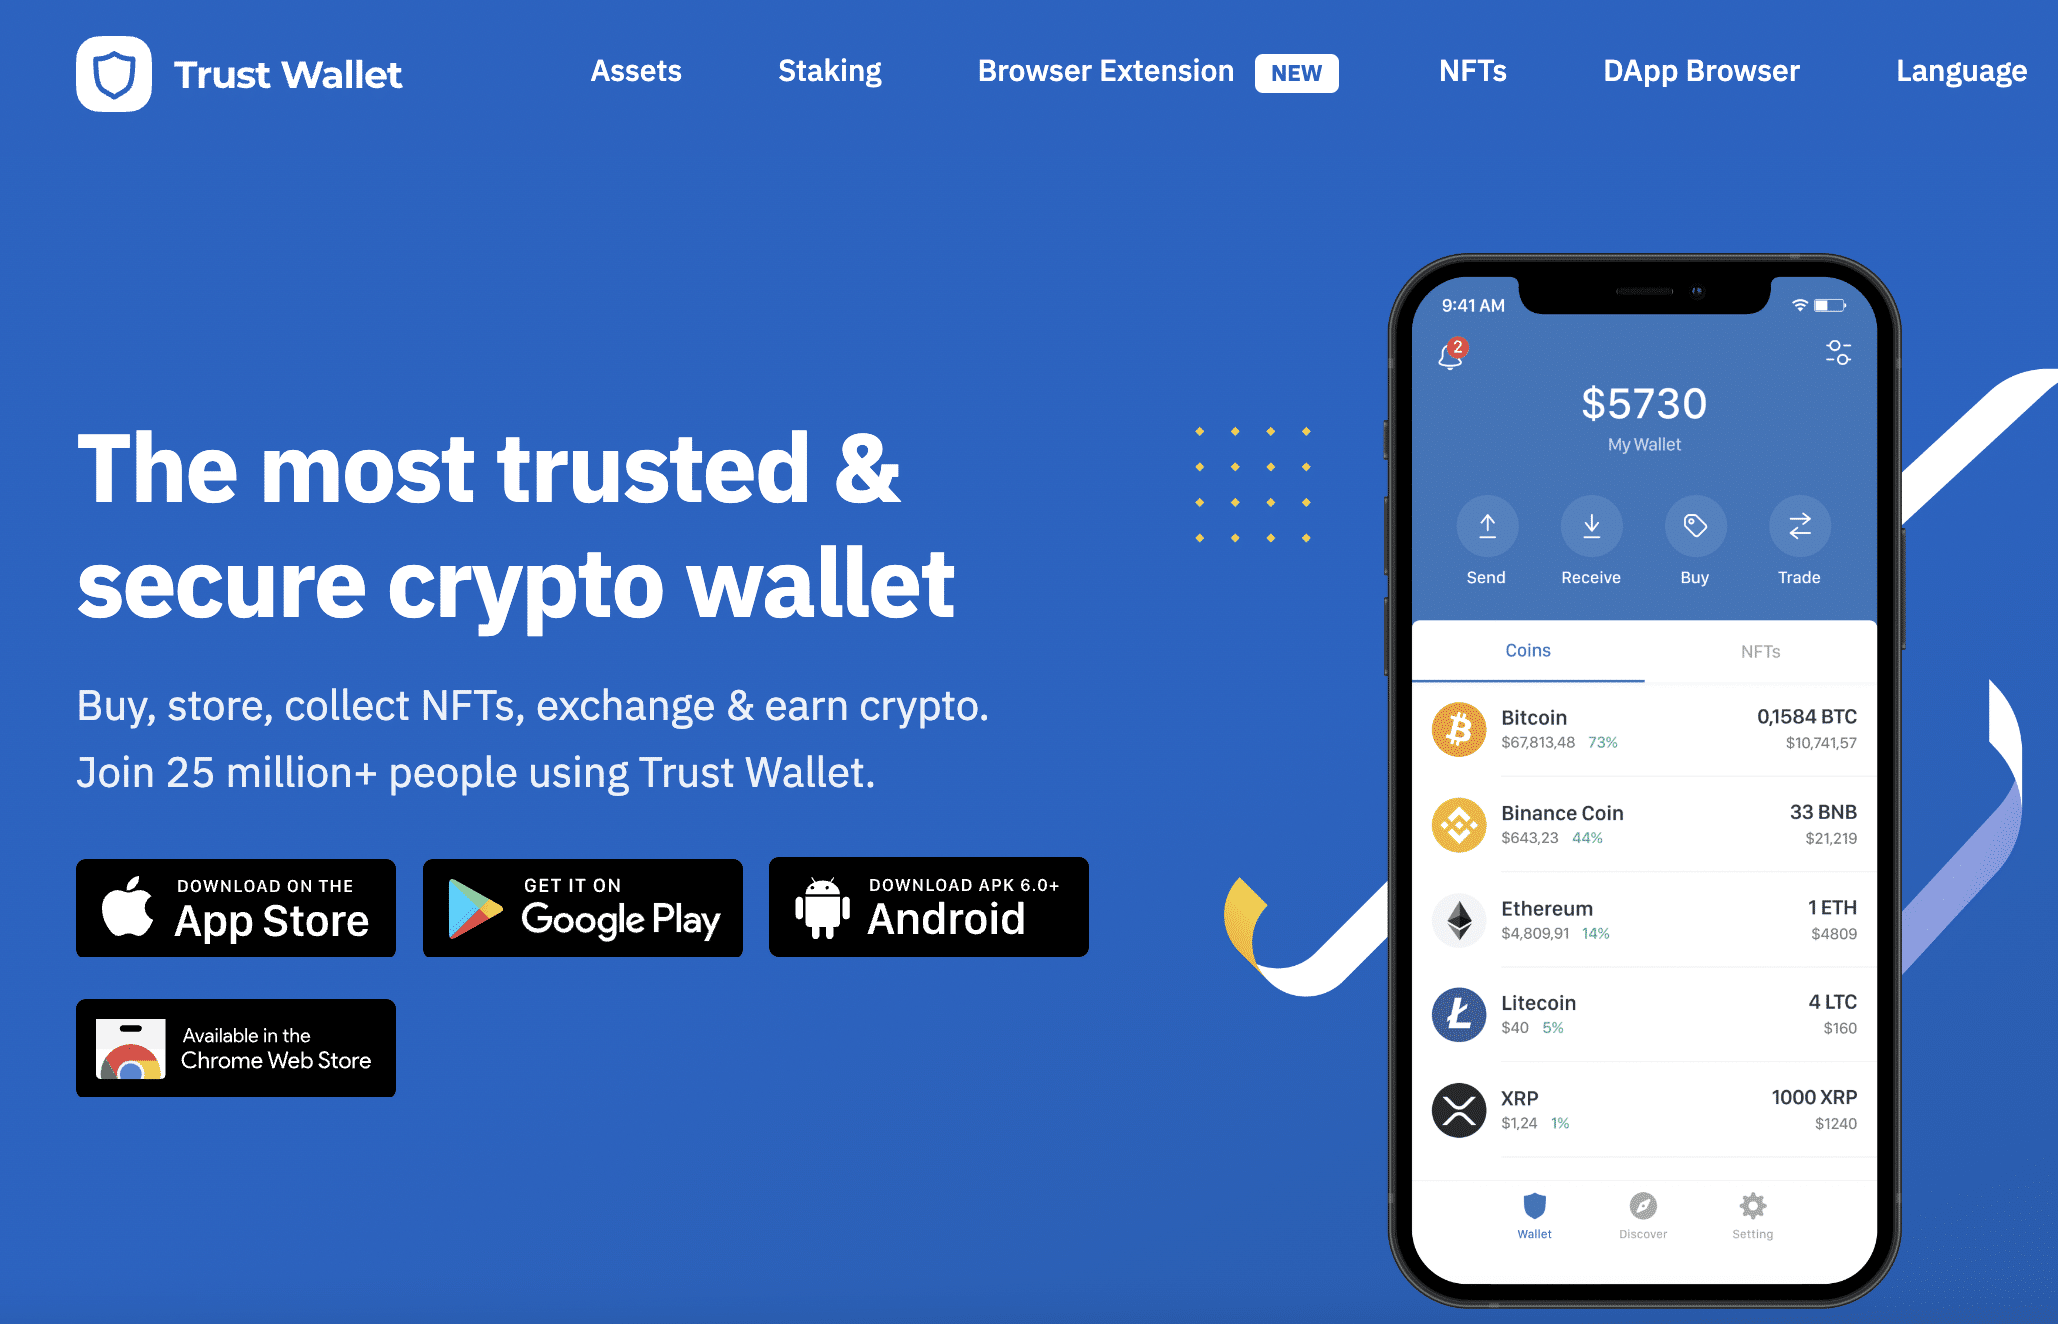 Best XRP Wallet | Beginner’s Guide to Ripple Wallets